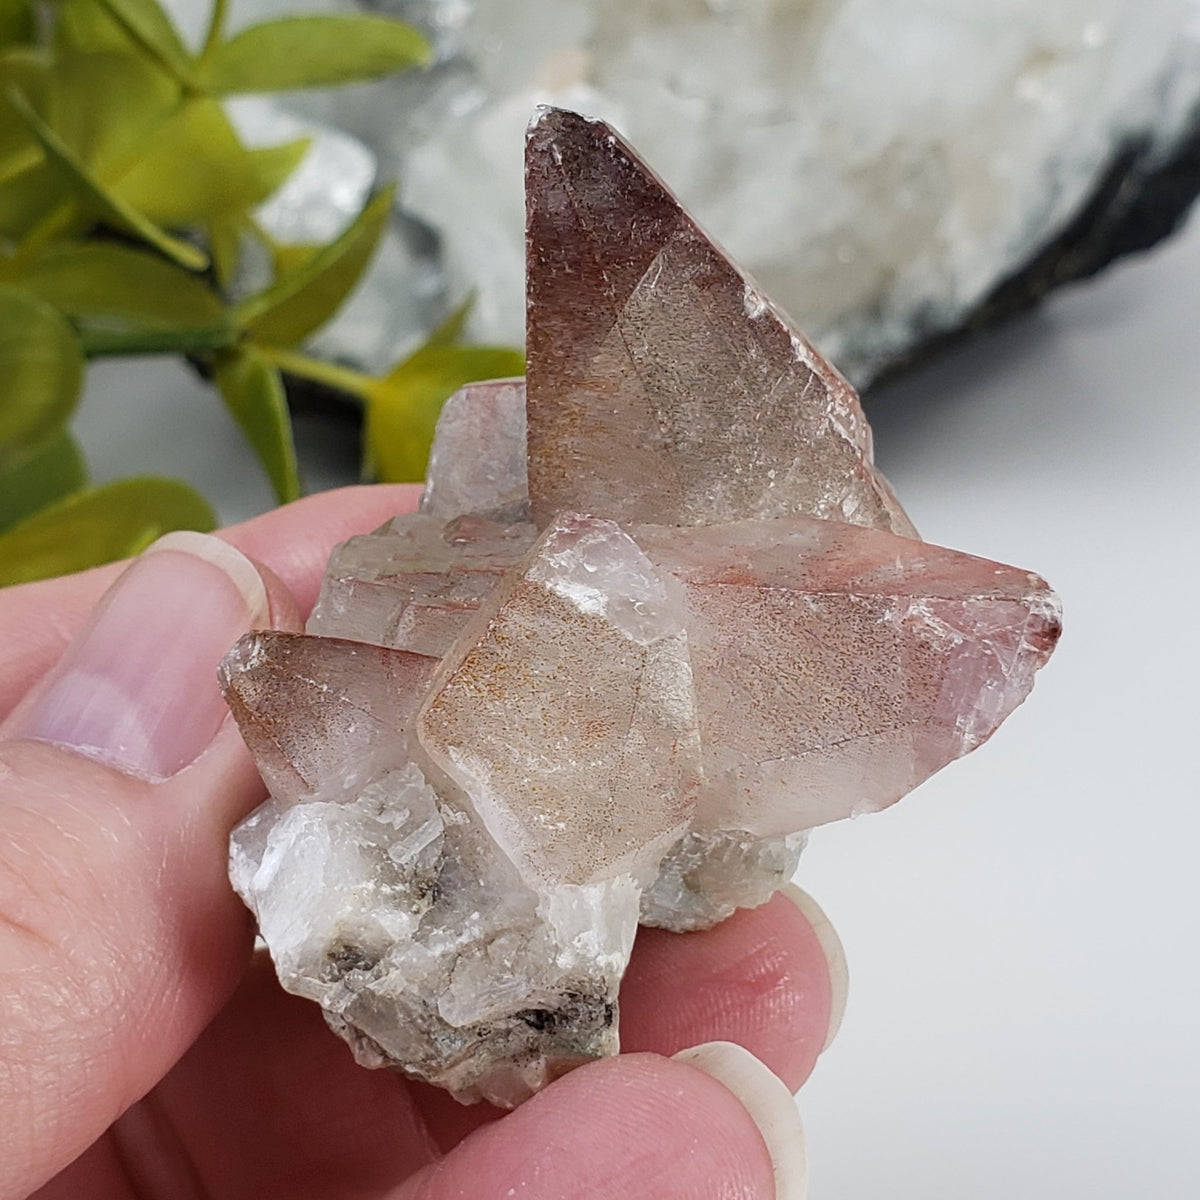 Calcite with Hematite on Matrix | 66.8 grams | Fluorescent Crystal | Lane's Quarry, Westfield MA